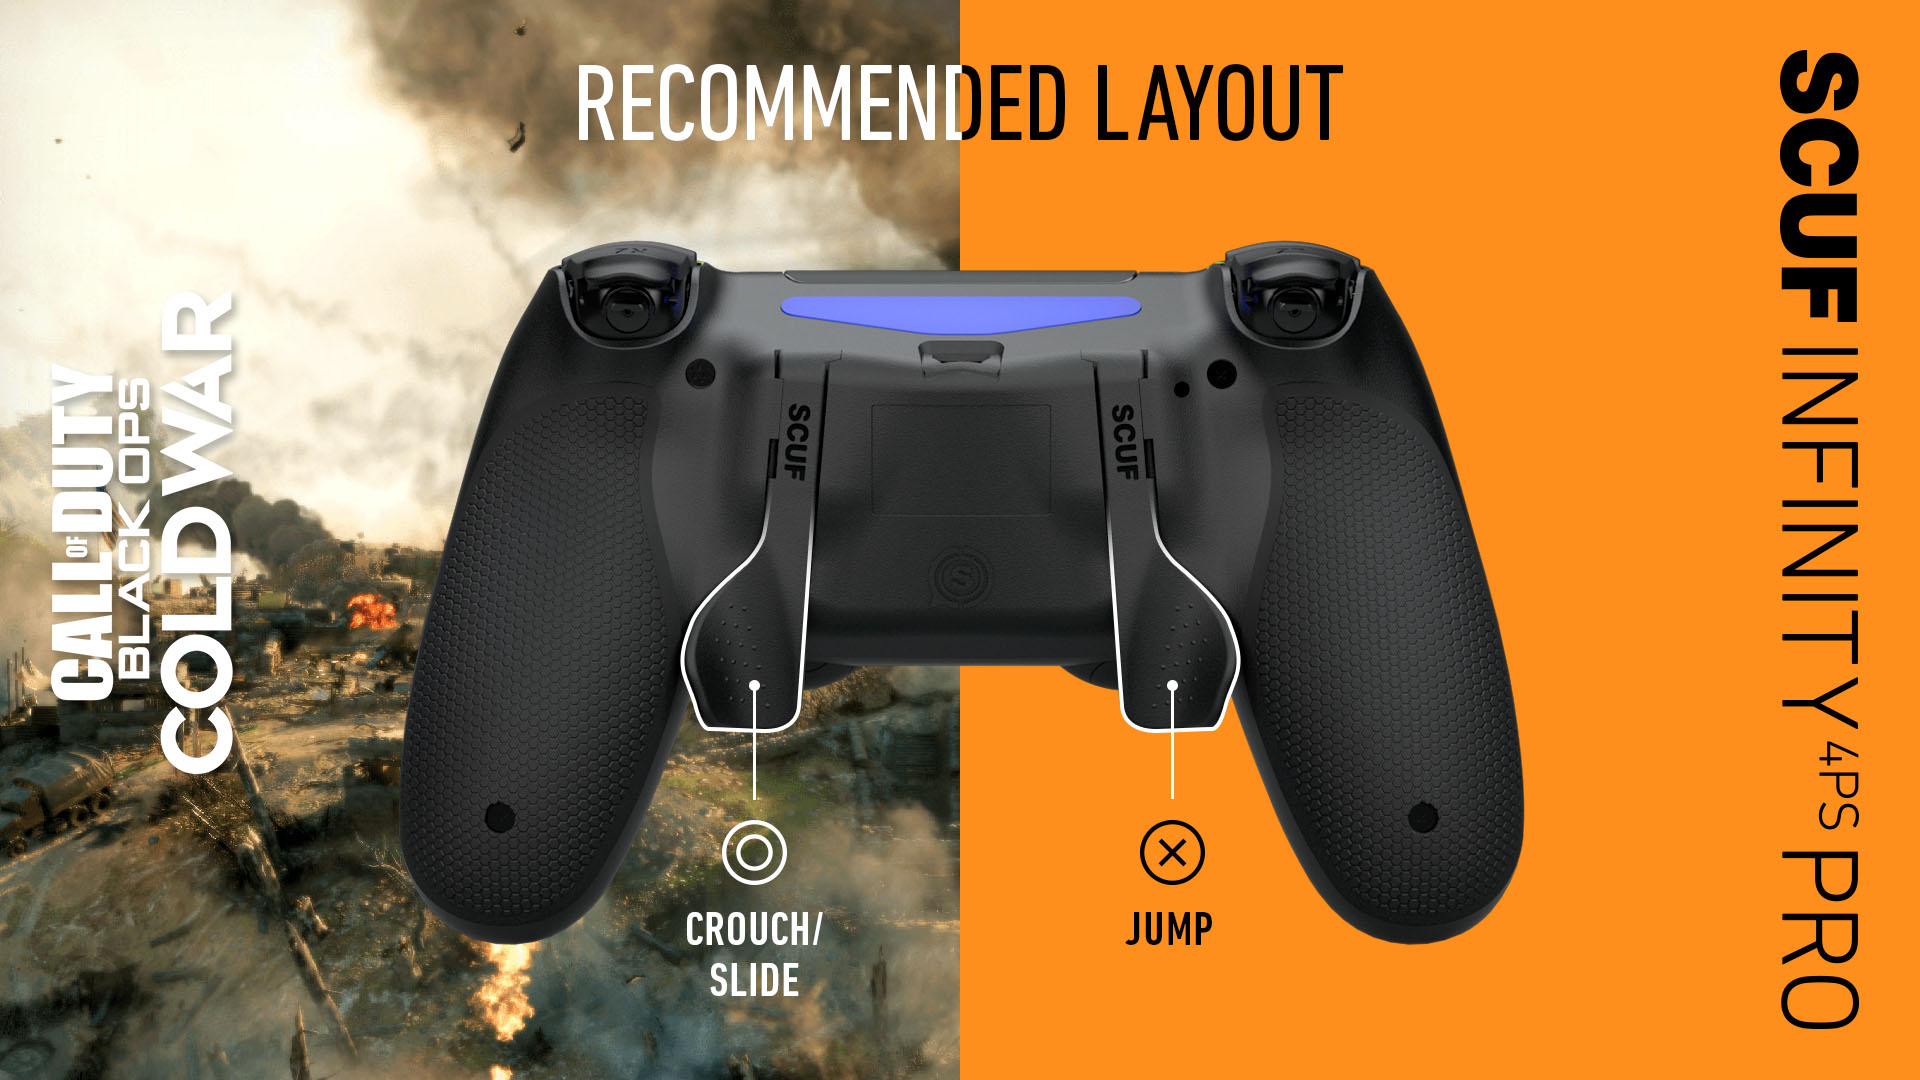 Scuf On Twitter Blackopscoldwar Is Here Gear Up Take Down The Competition With Your Scuf Here S Some Tips To Get You Started Https T Co Qr7cjbnezm Https T Co Q8zv19ewvv